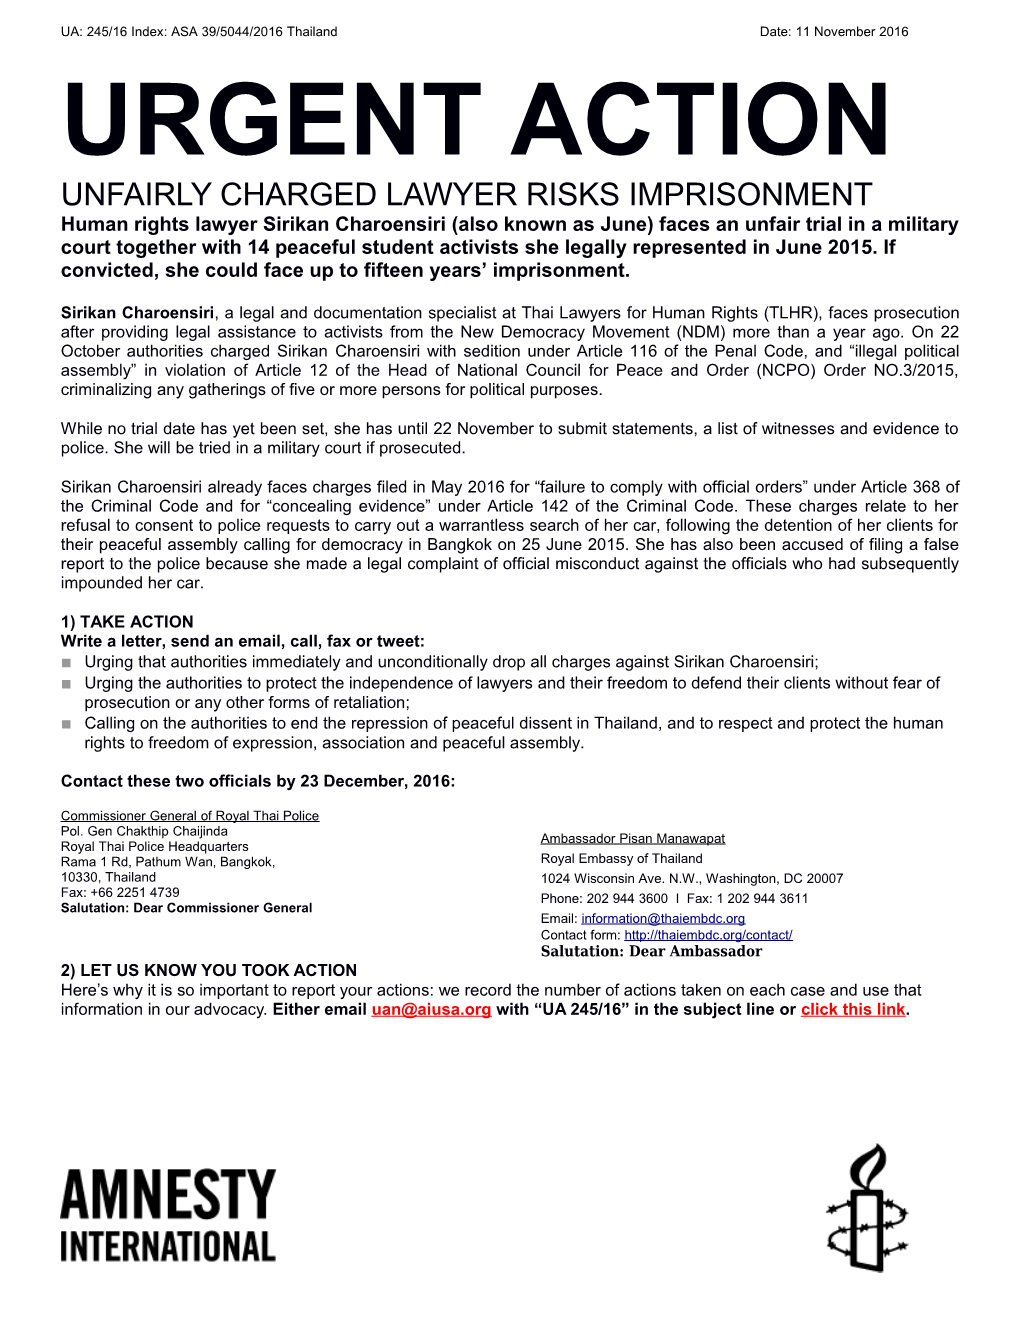 Unfairly Charged Lawyer Risks Imprisonment